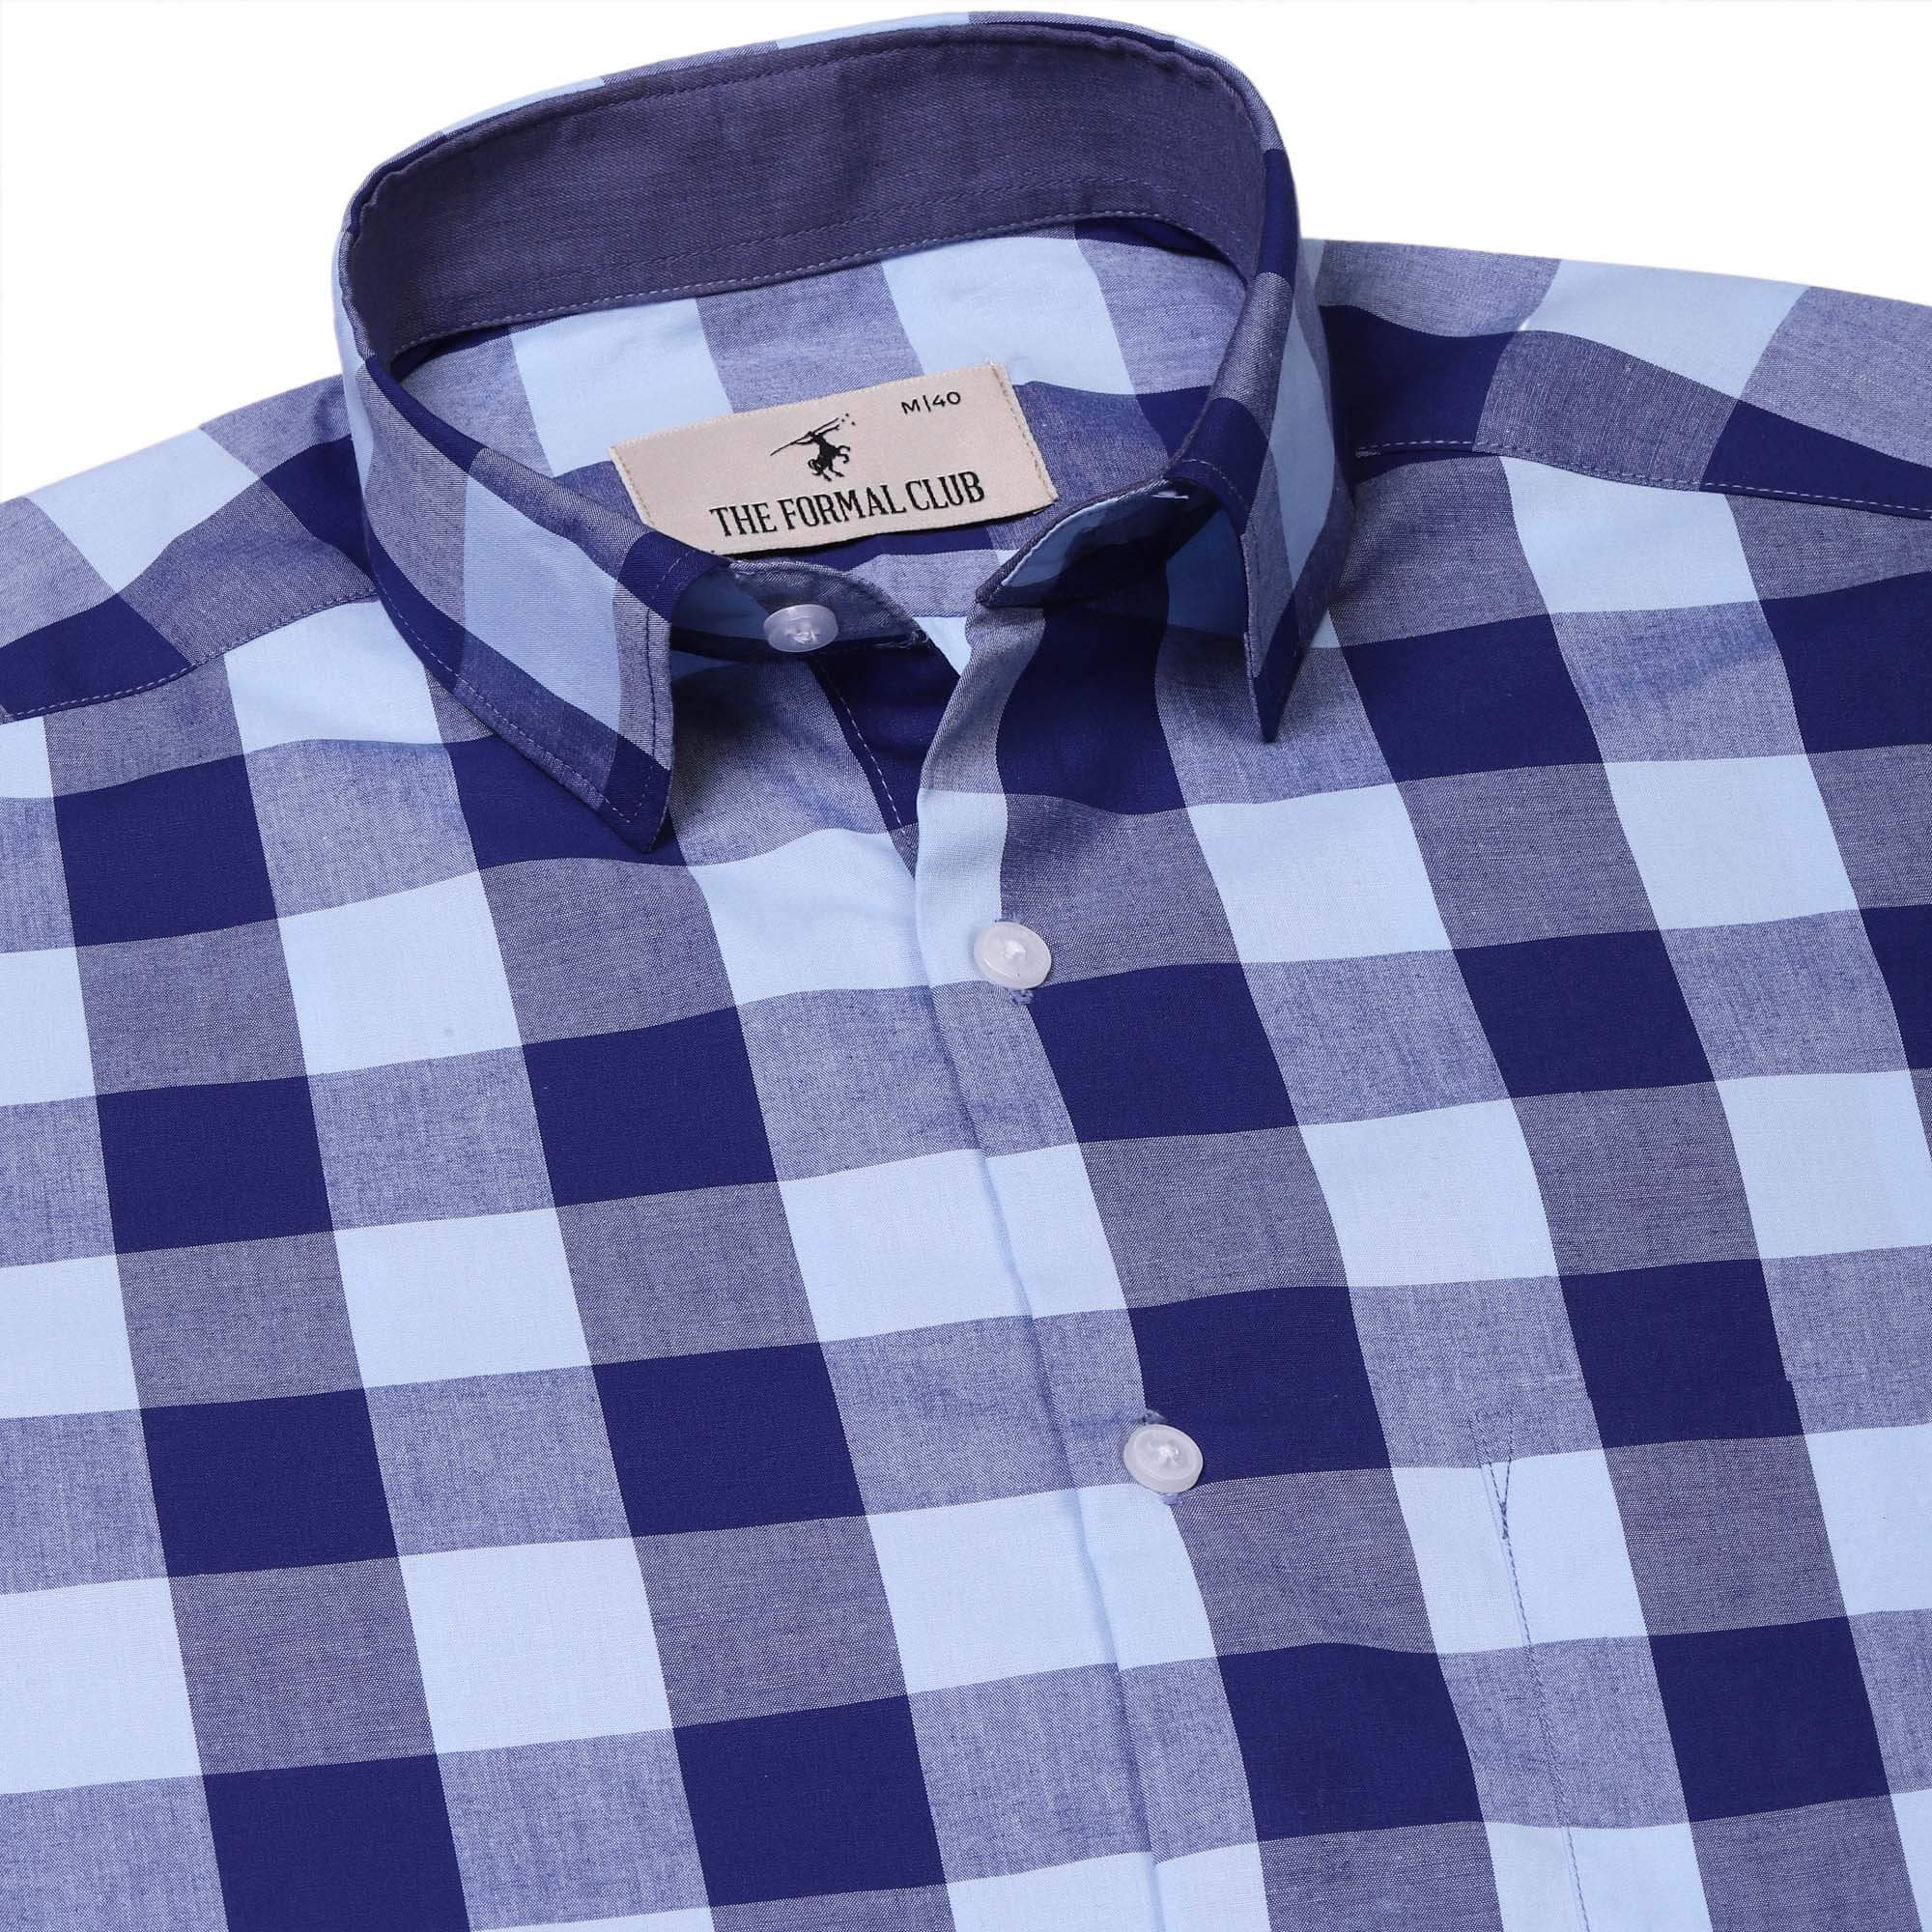 Zephyr Check Shirt In Navy Blue Slim Fit - The Formal Club